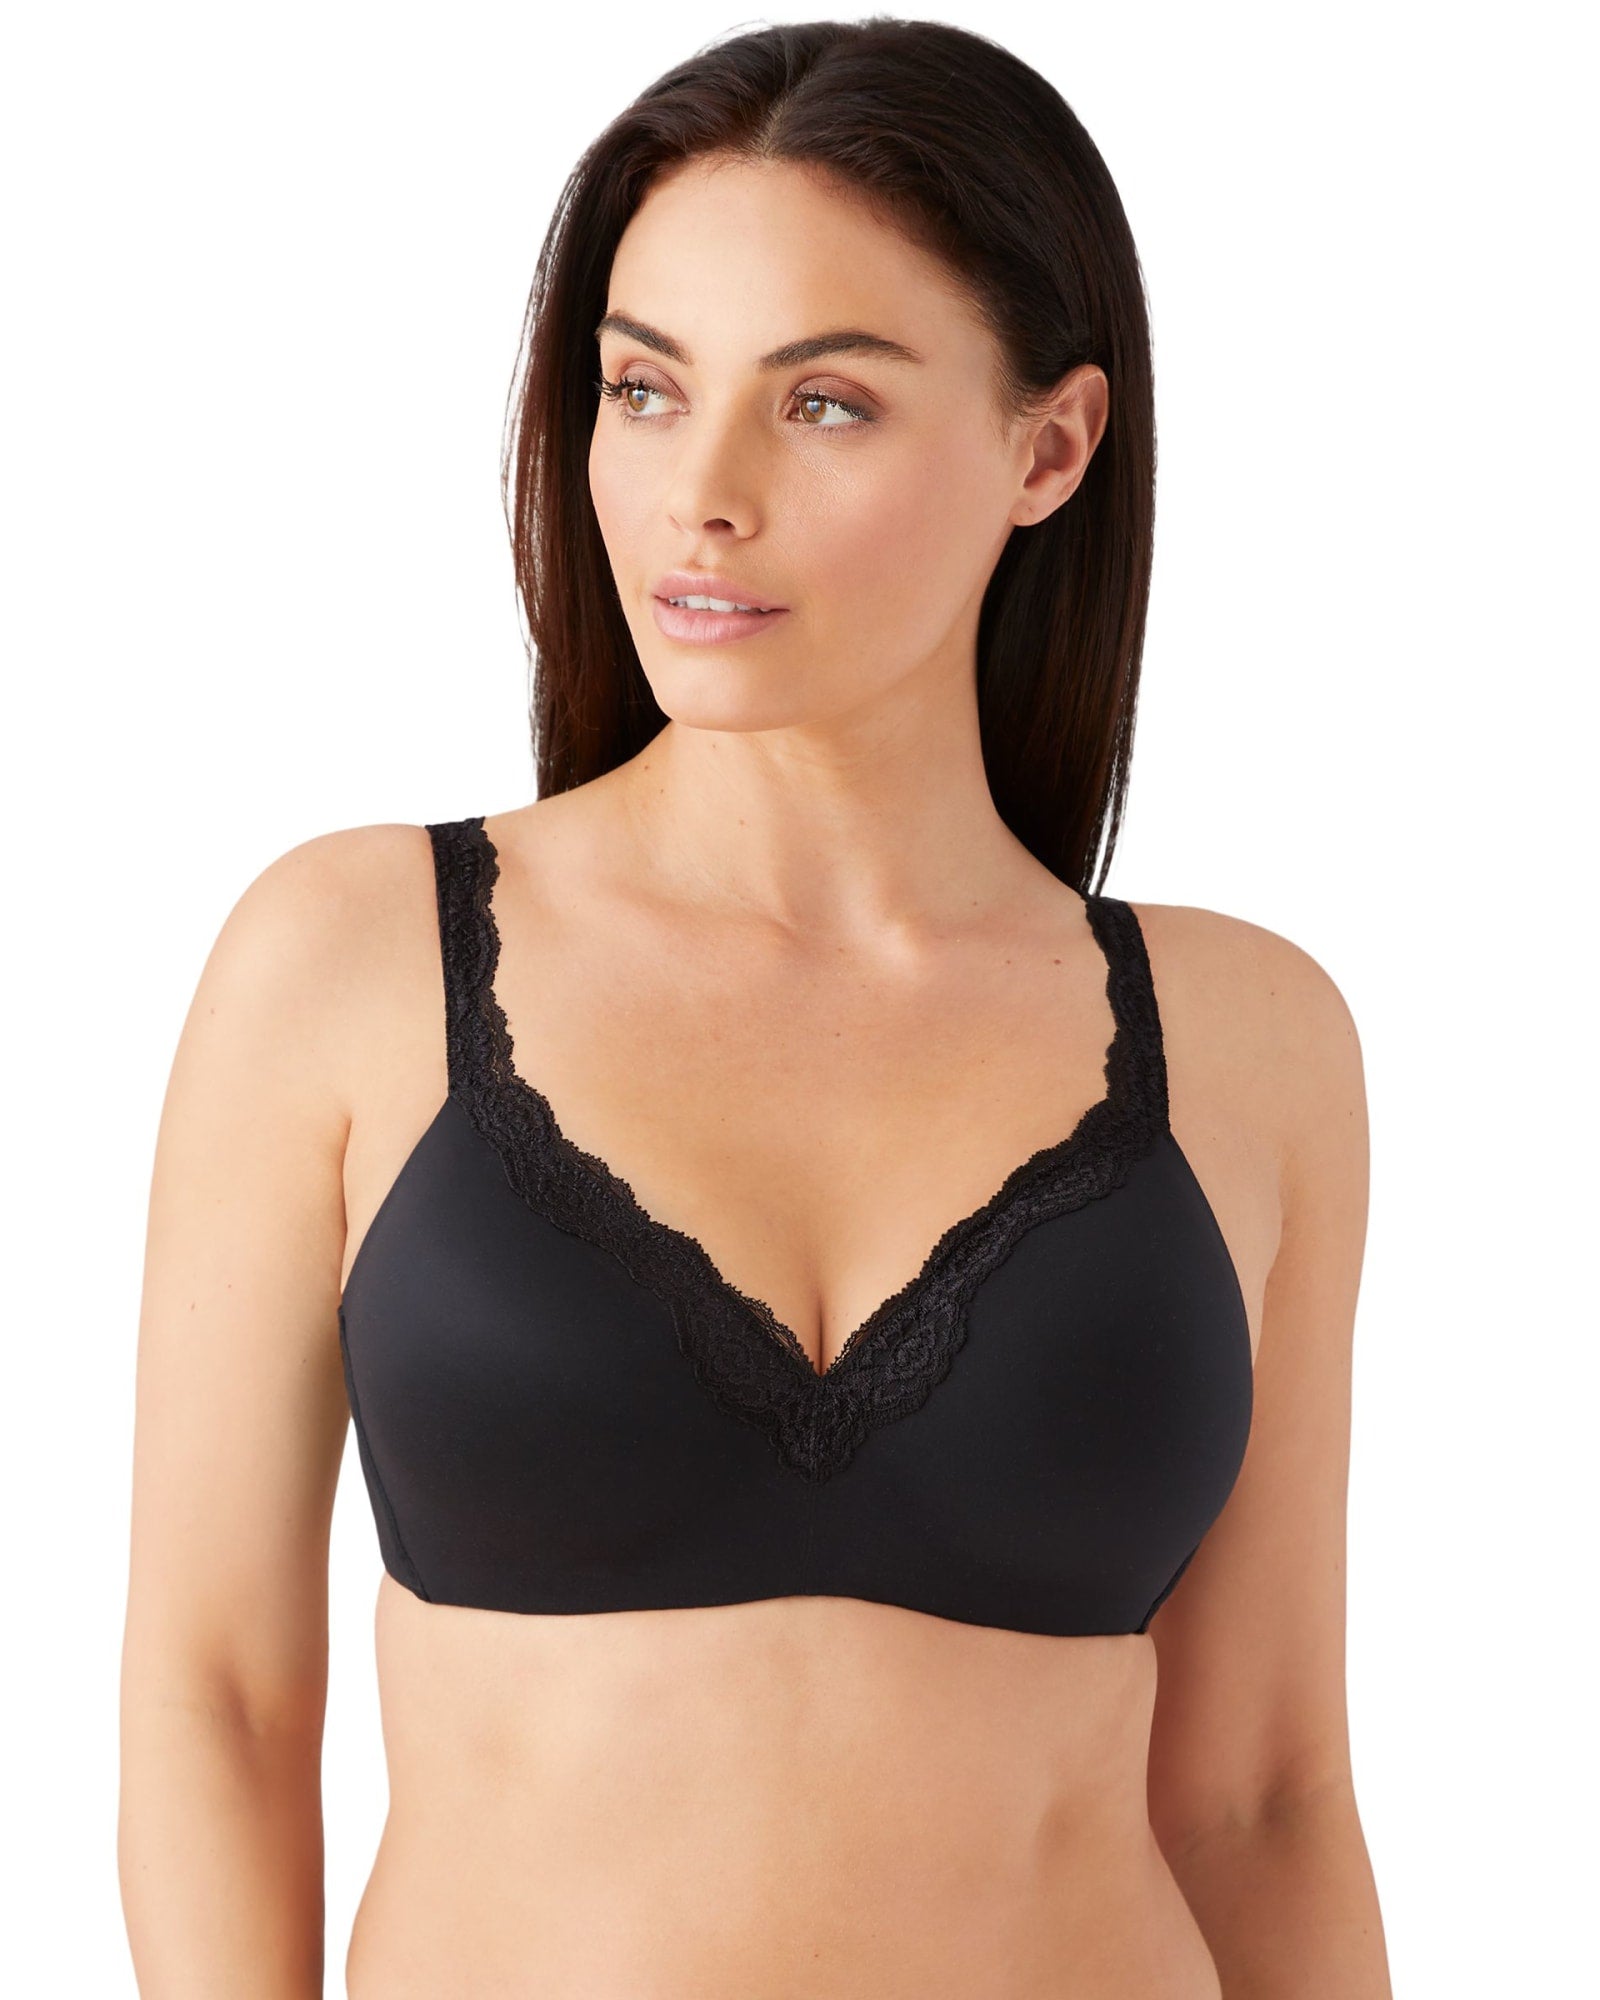 MIERSIDE Women's Fashion Breathable Sexy Lace Plus Size Non Padded Bra (30D)  Black at  Women's Clothing store